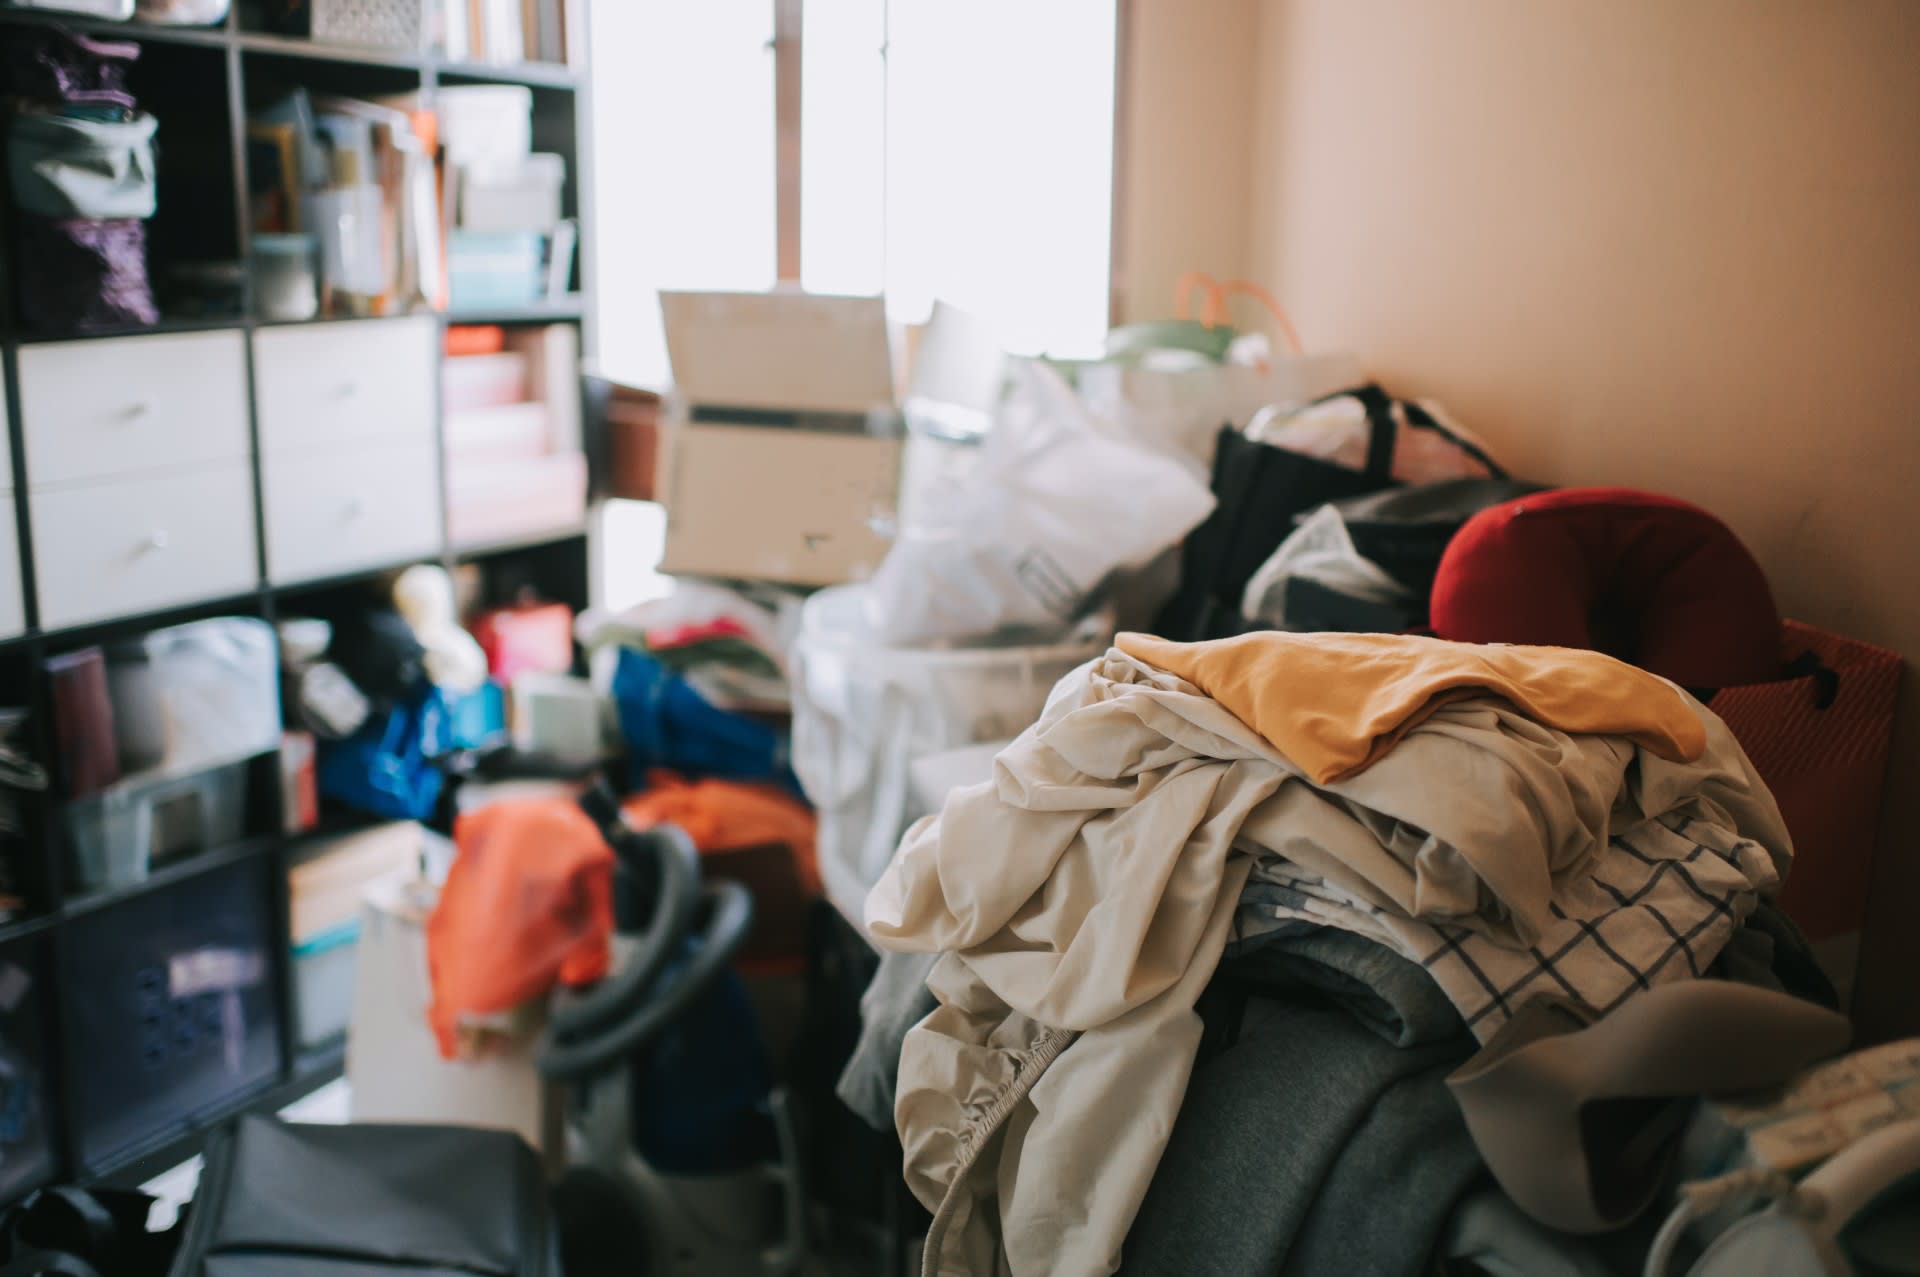 Clothes, bags, boxes and things piled high in a room, with shelving space also packed full of items.